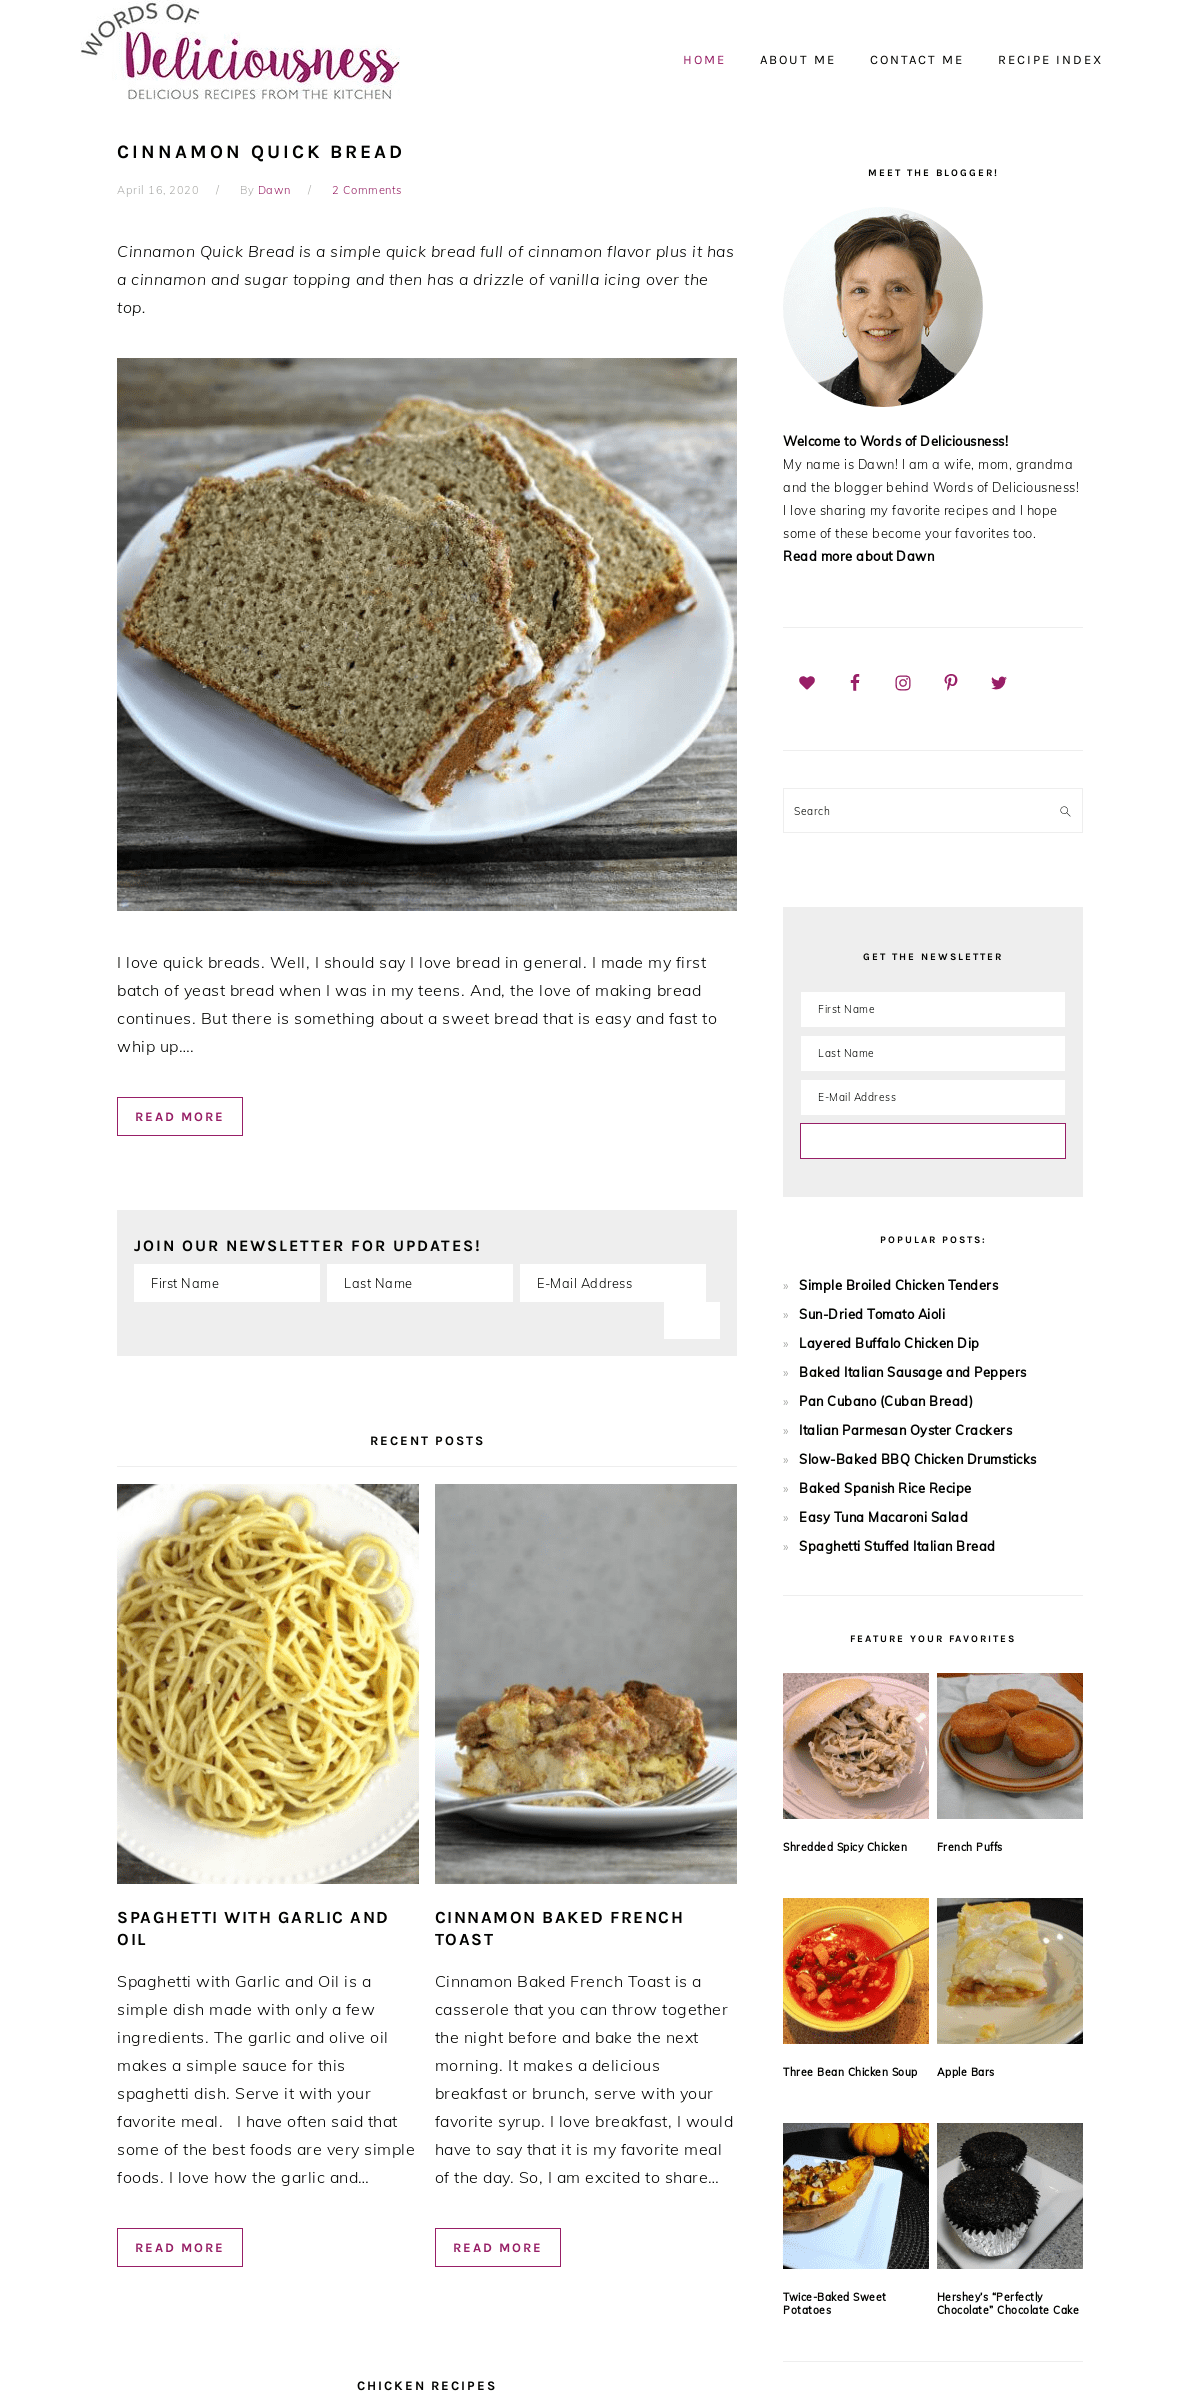 A complete backup of wordsofdeliciousness.com